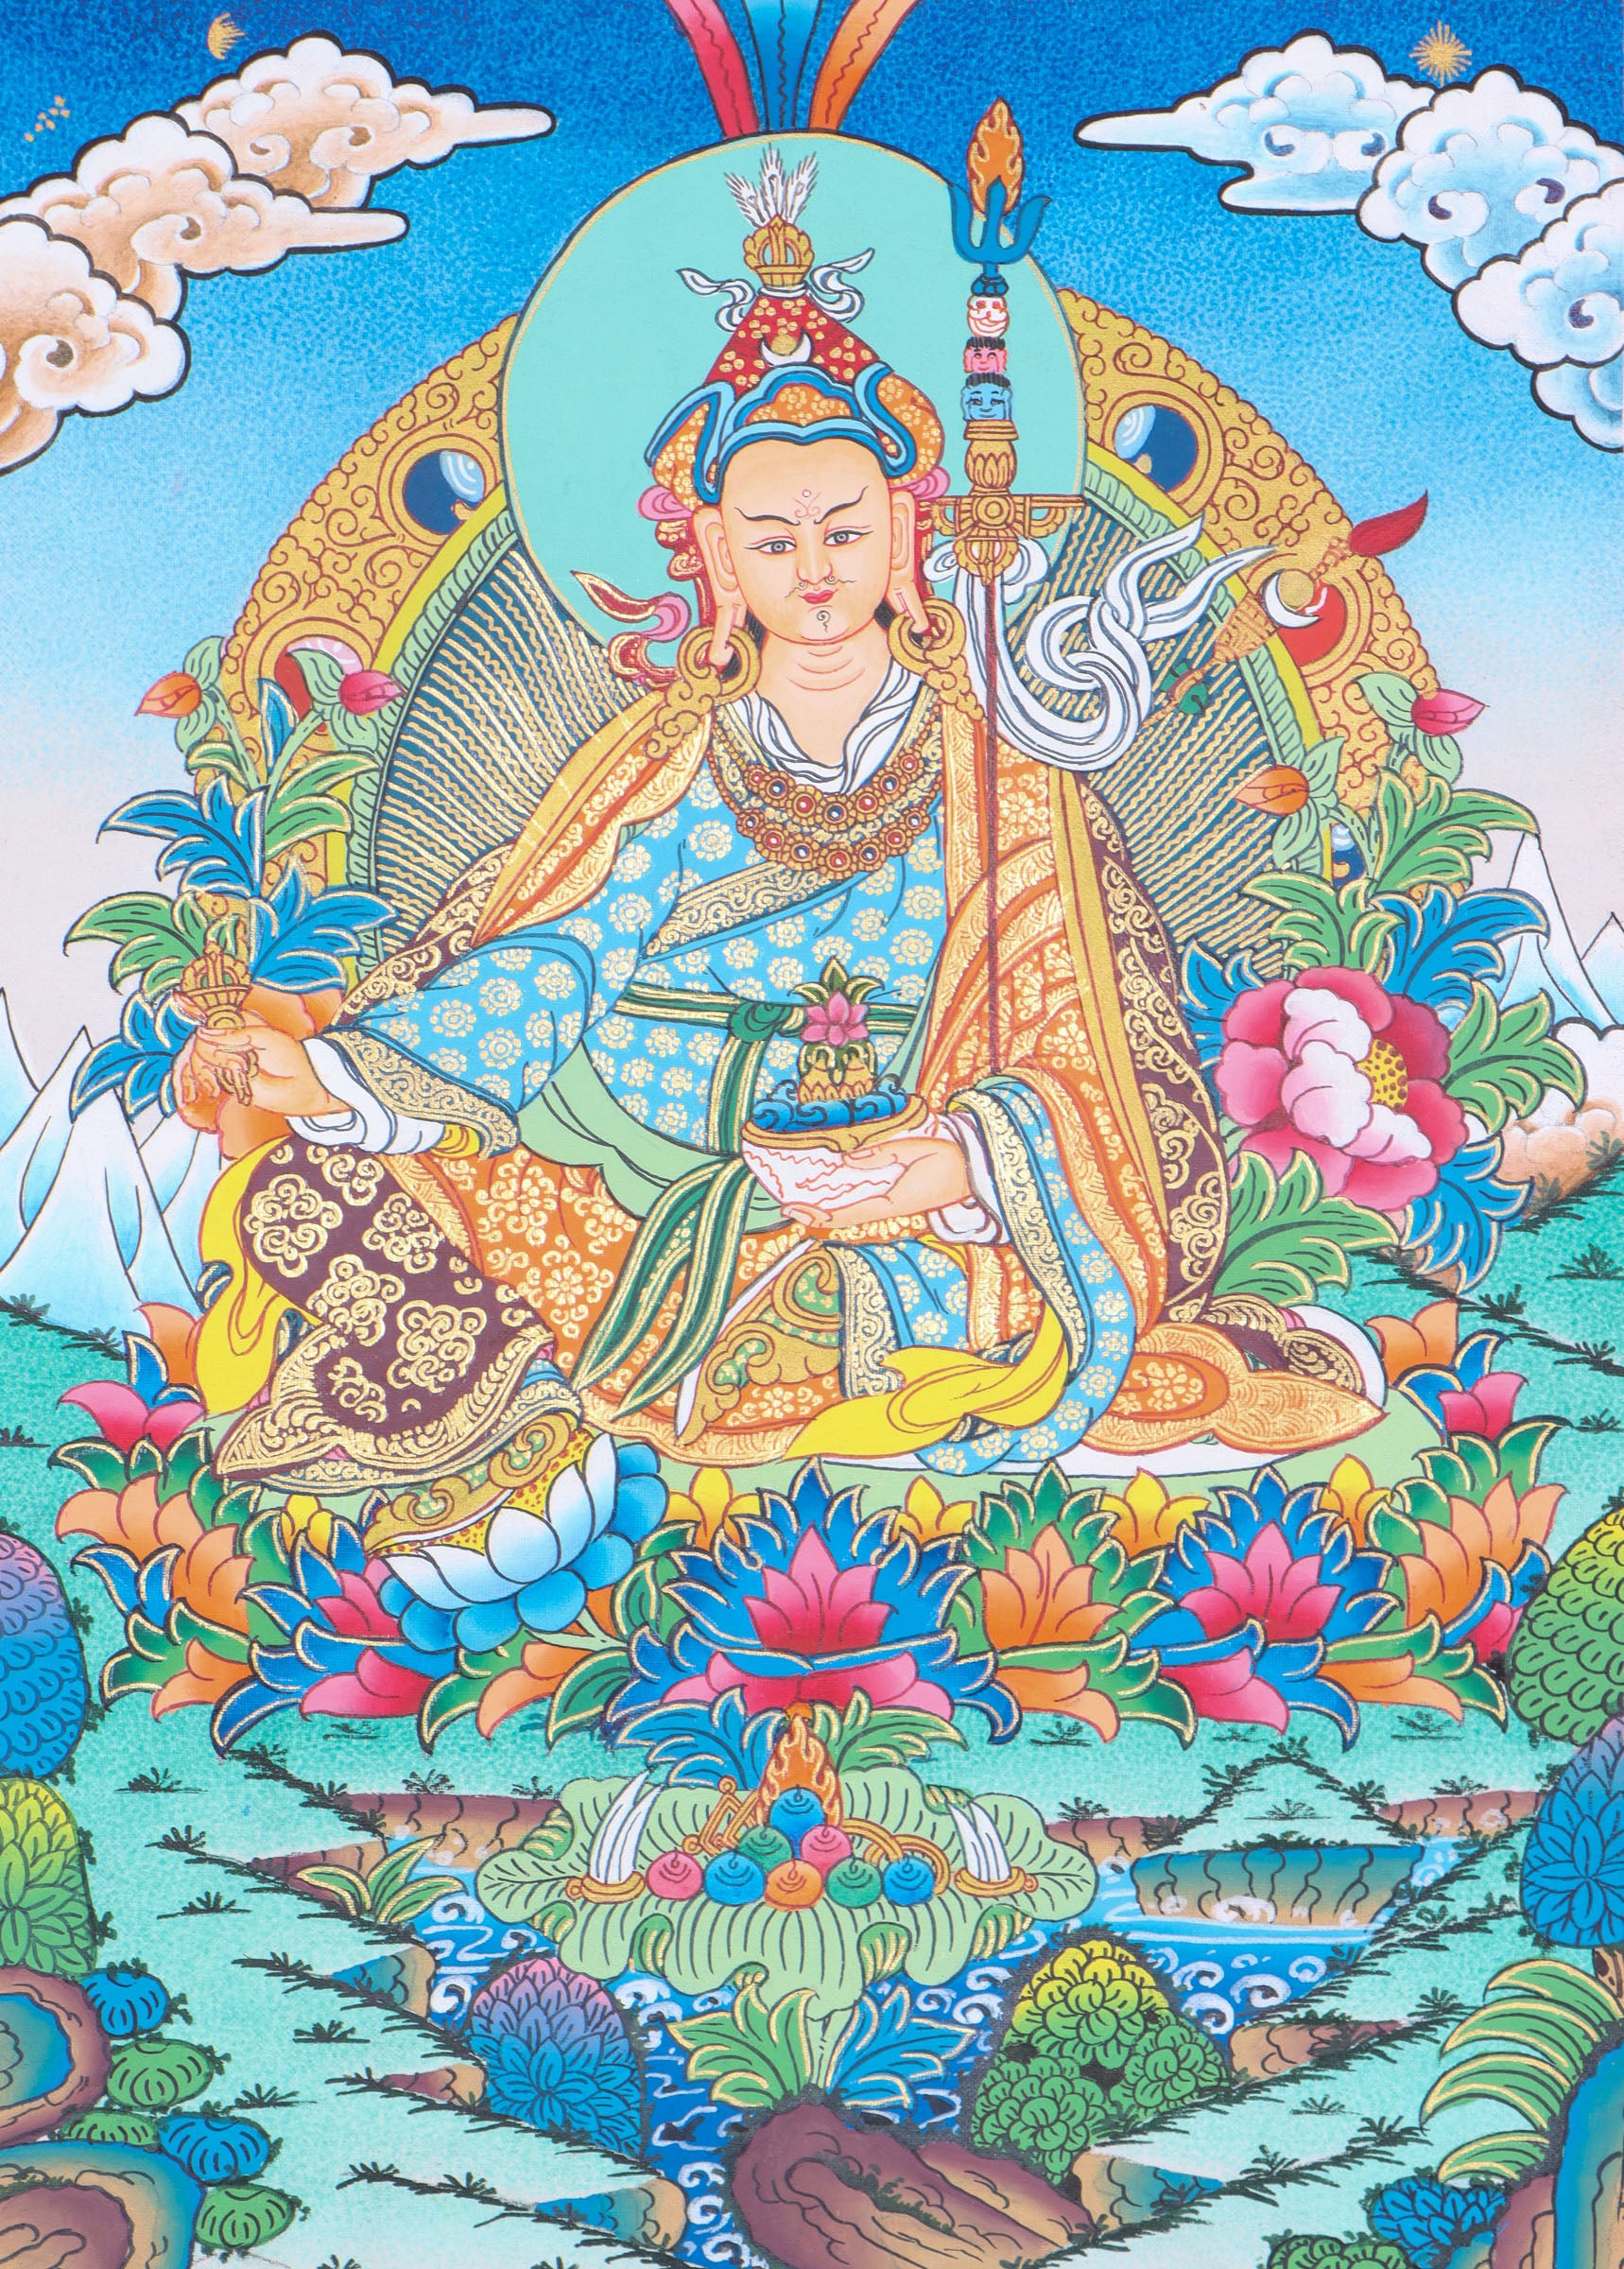 Guru thangka painting is a beautiful work of art that depicts knowledge, spirituality, and divinity. 